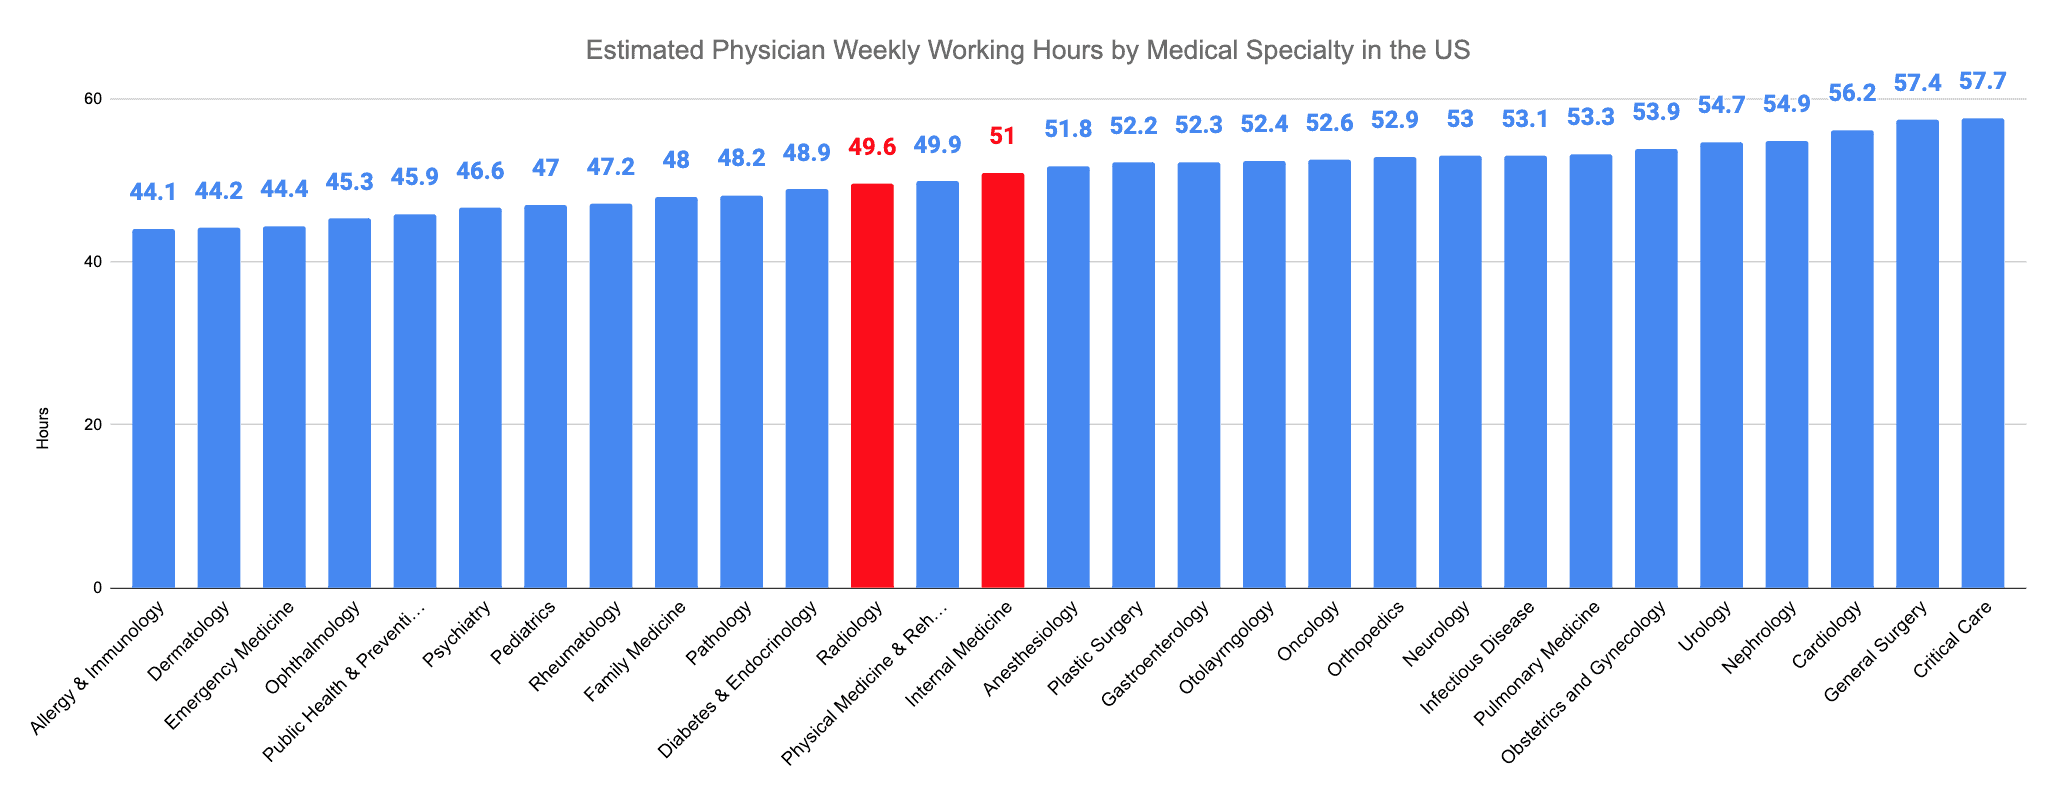 Radiology vs. Internal Medicine Estimated Physician Weekly Working Hours by Medical Specialty in the US